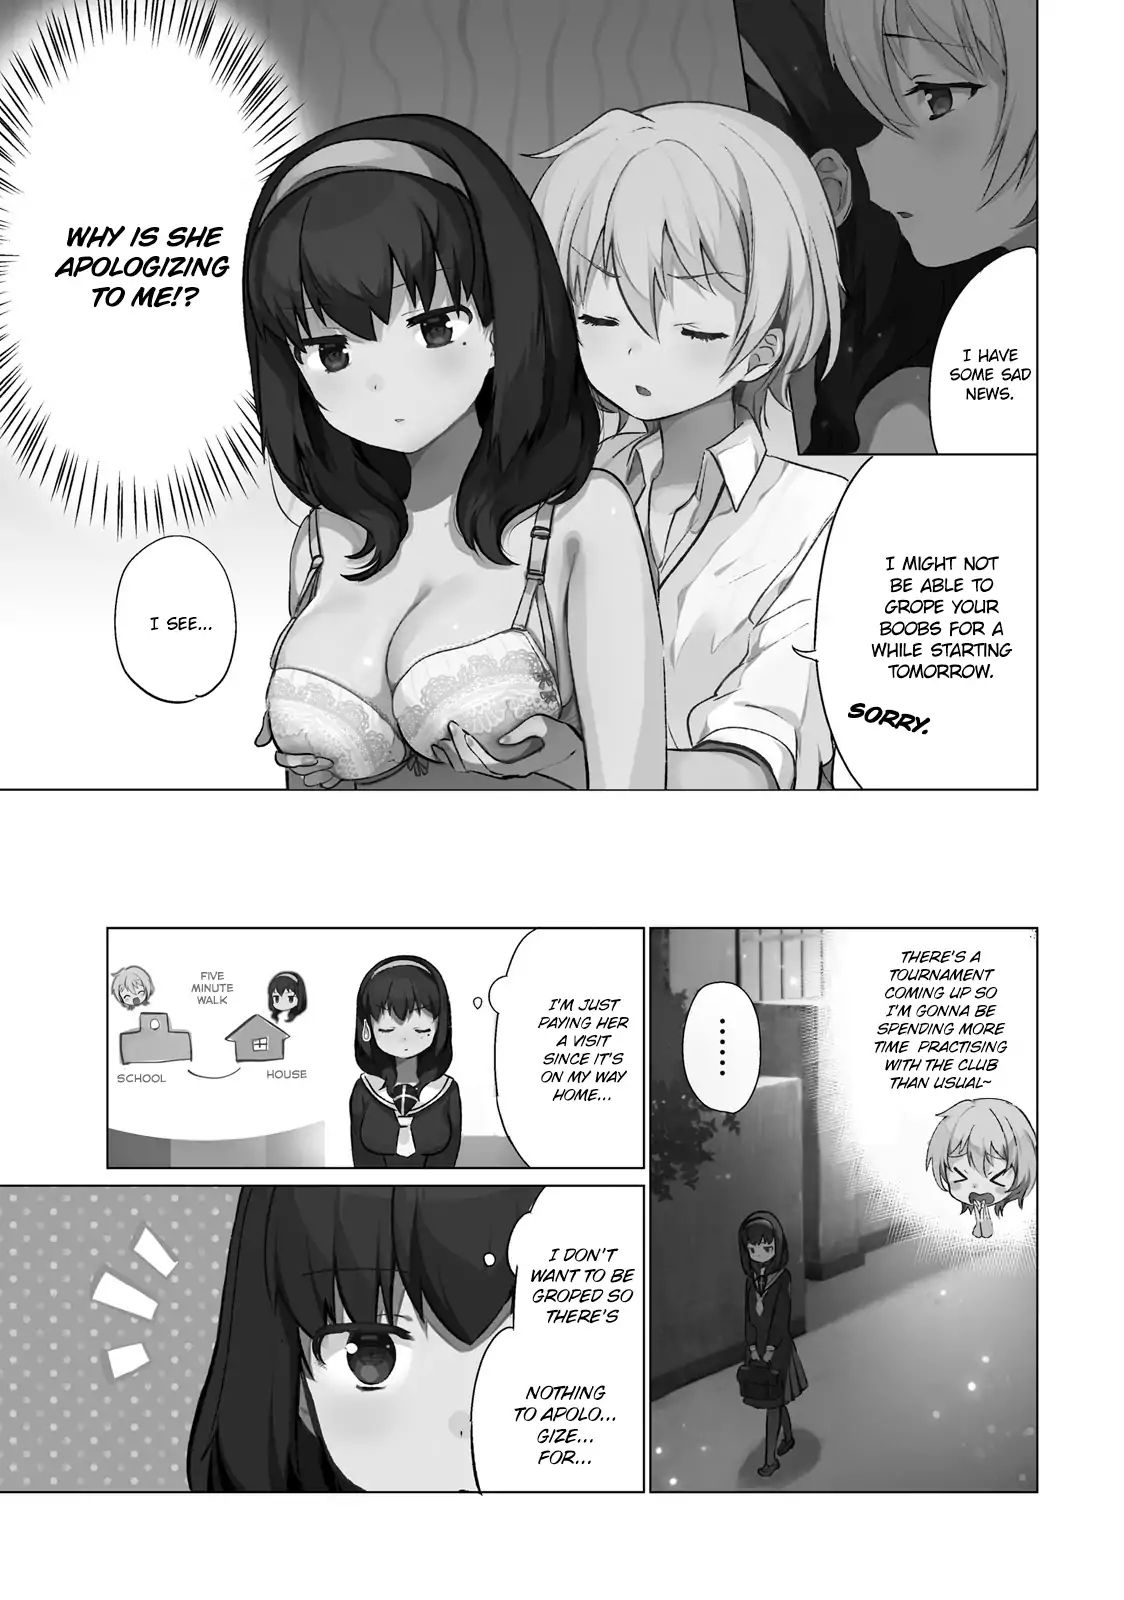 I Like Oppai Best In The World! - Page 1